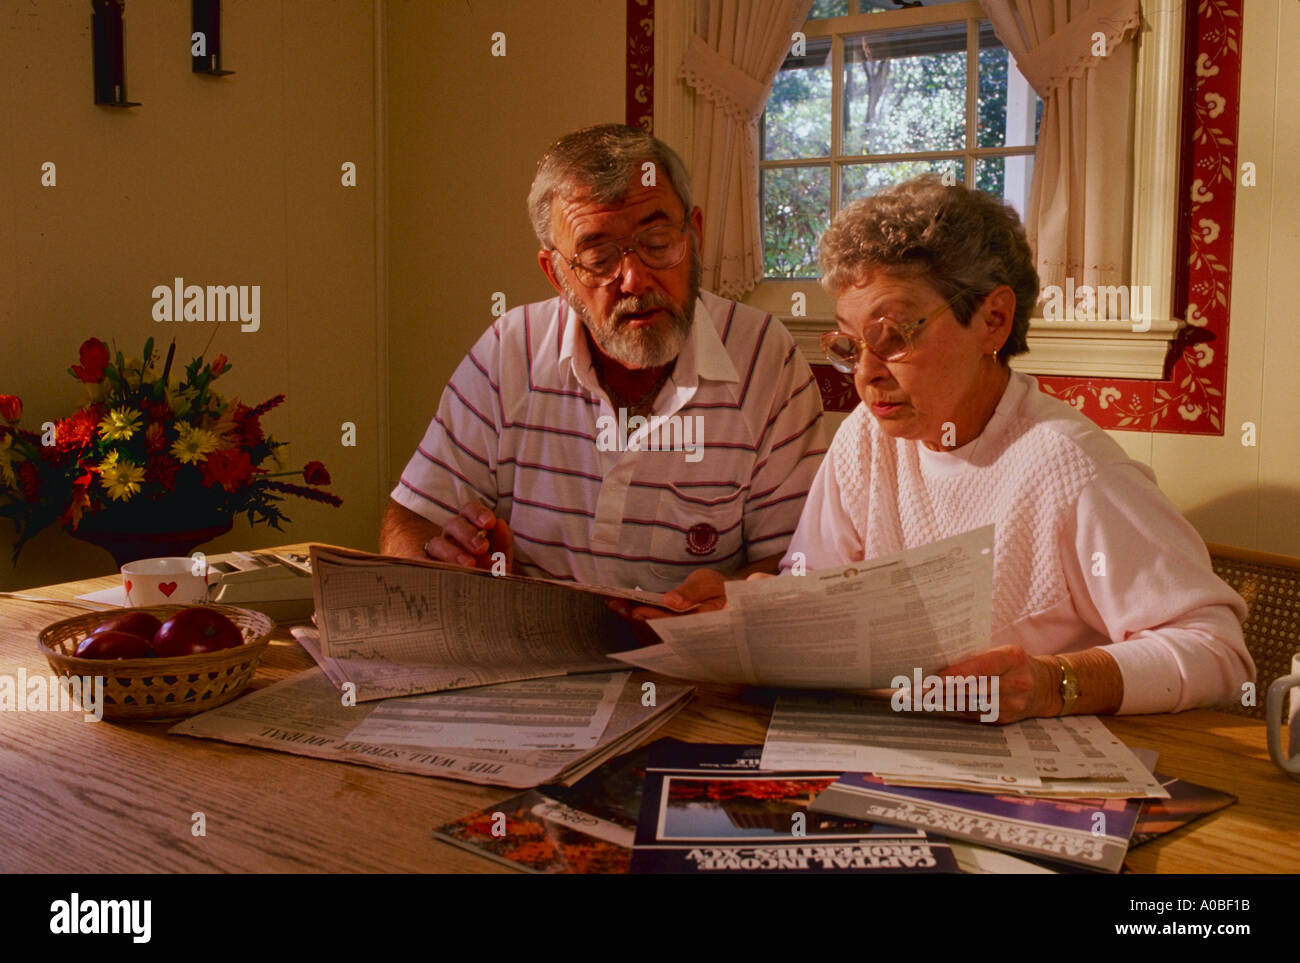 Mature couple works on personal finances at their kitchen table Stock Photo